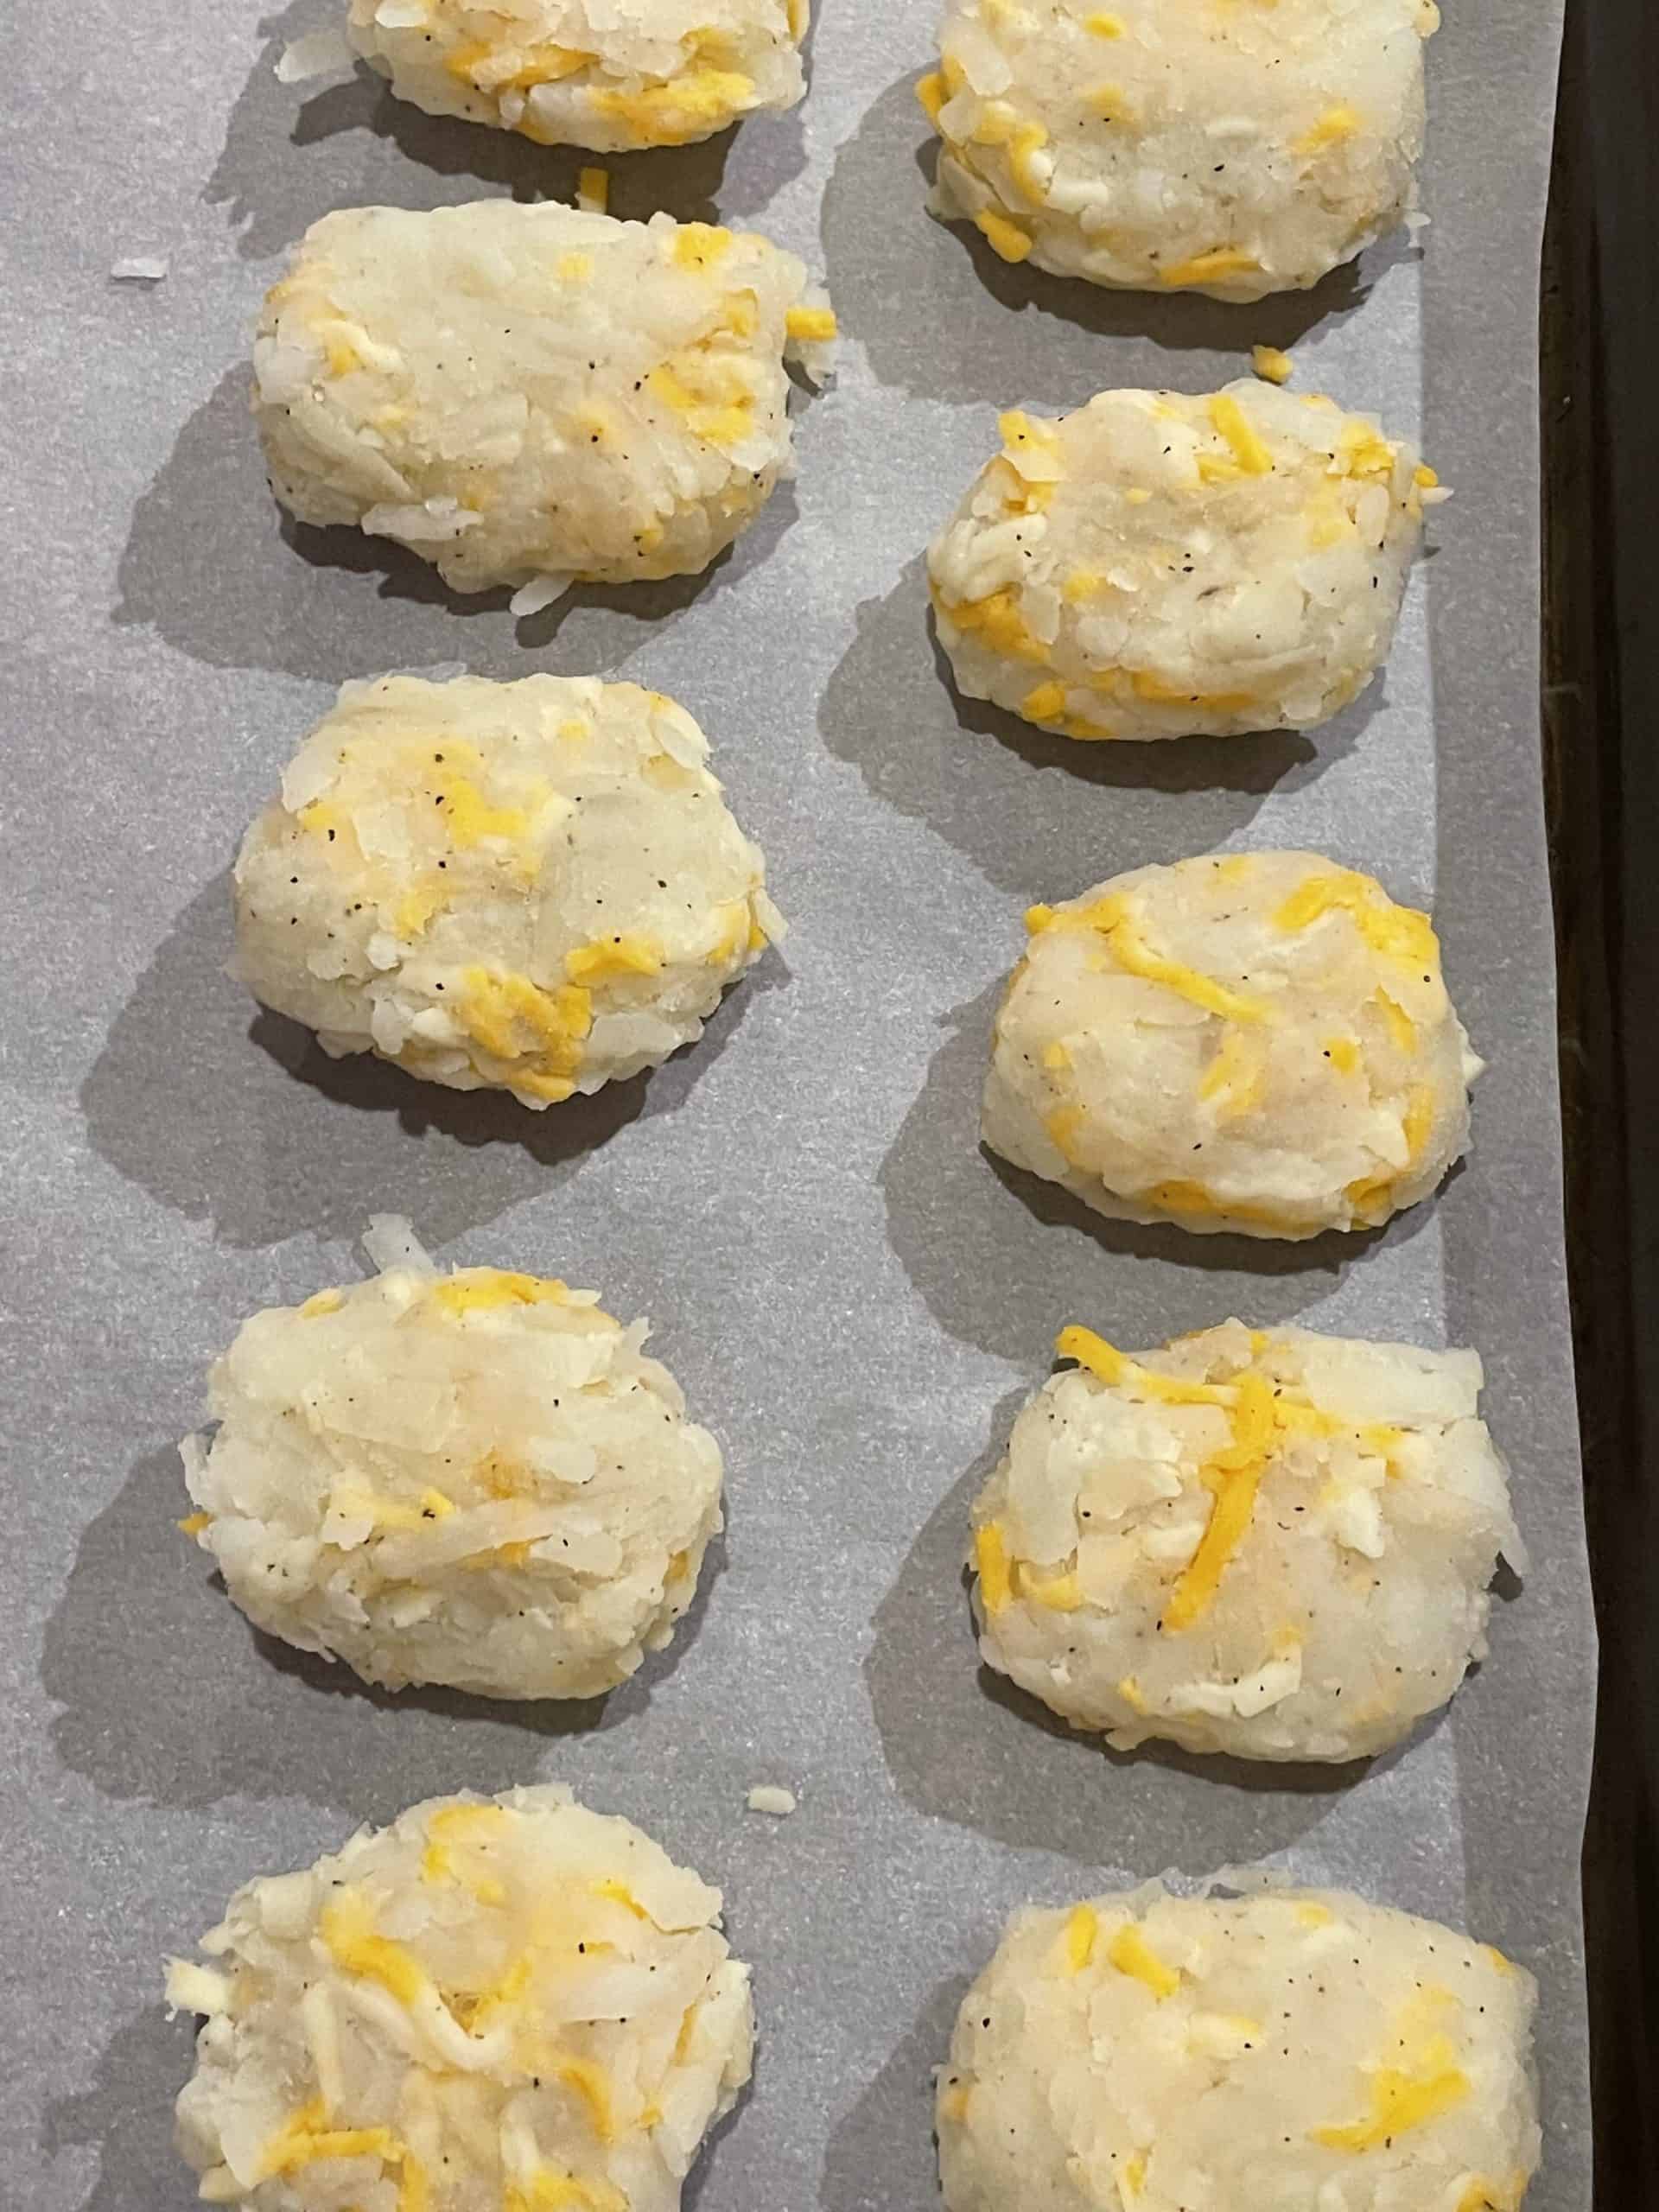 Formed Cheesy Tater Tots Recipe lined up on a sheet pan.